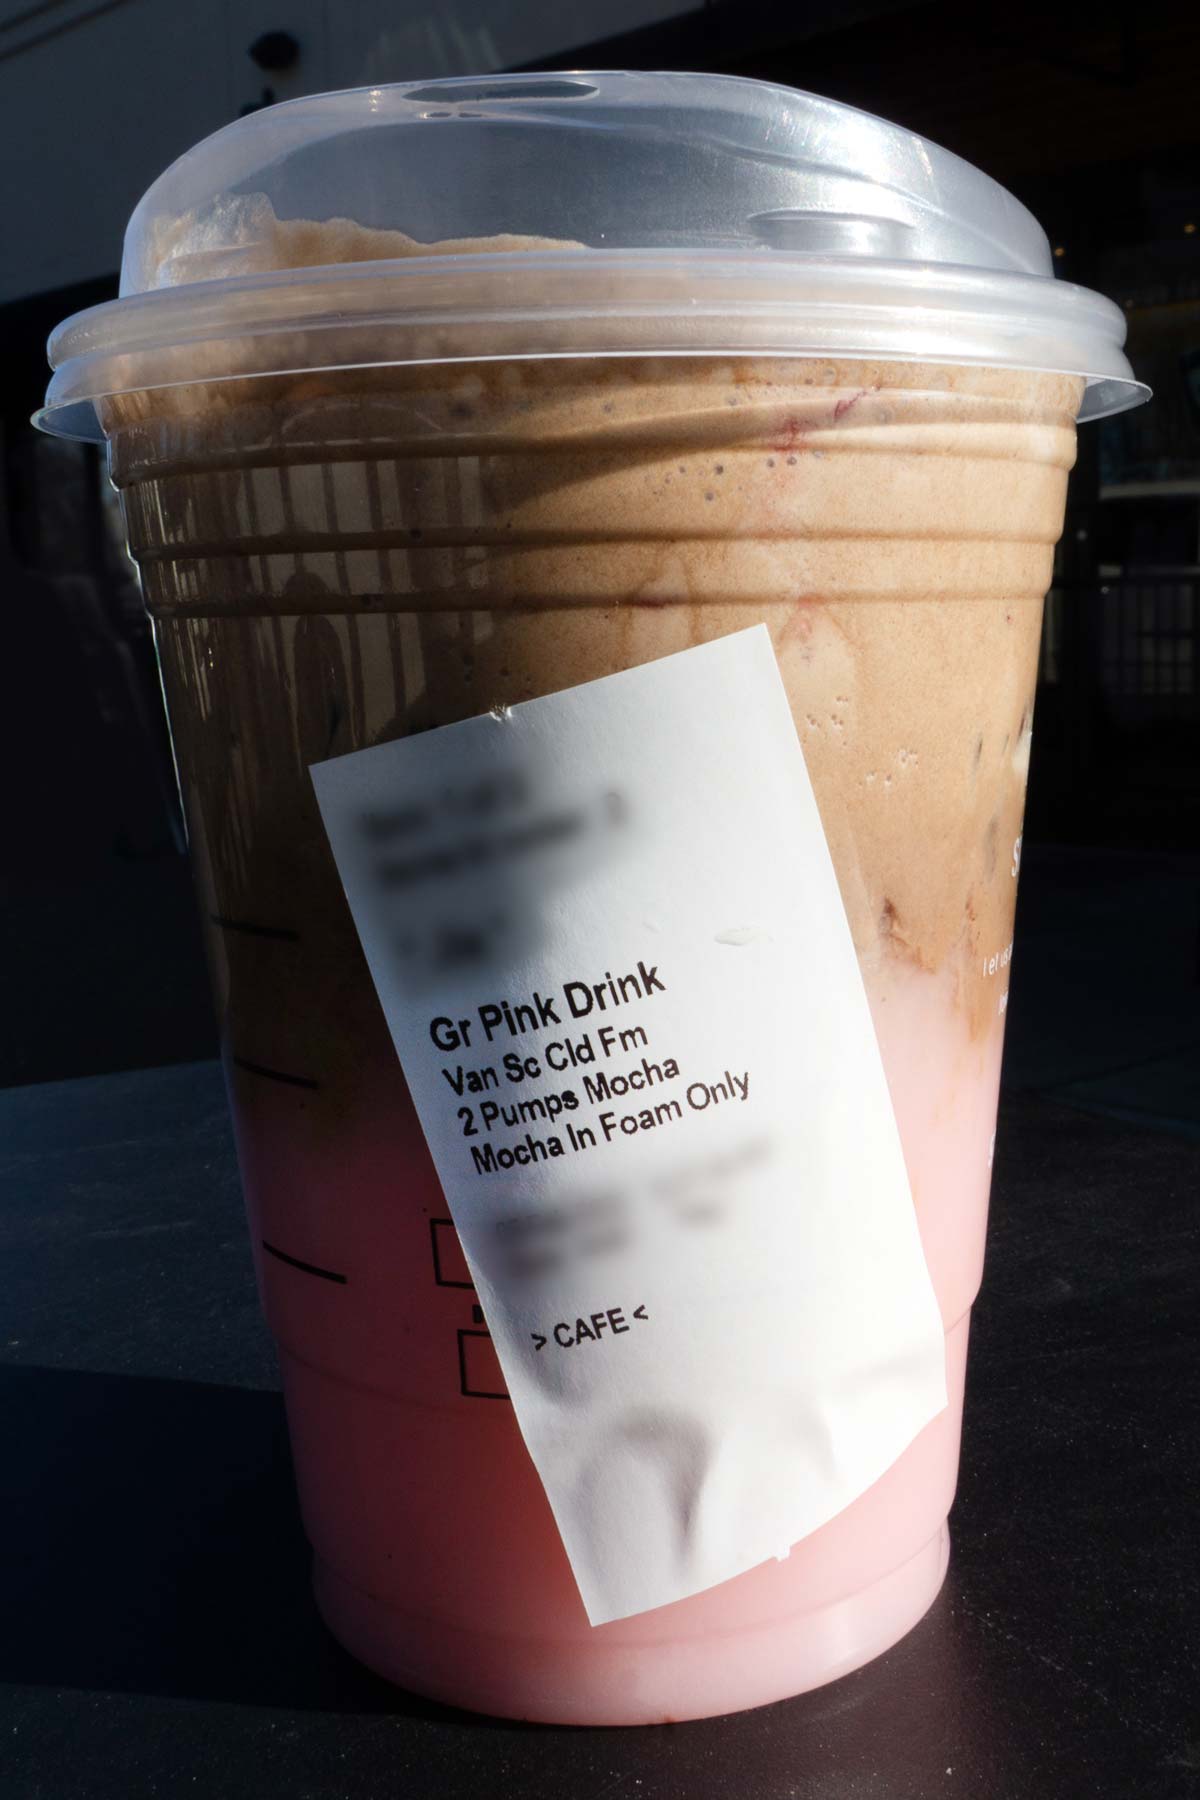 Starbucks Pink Drink in a cup with a lid and ingredients on the label.